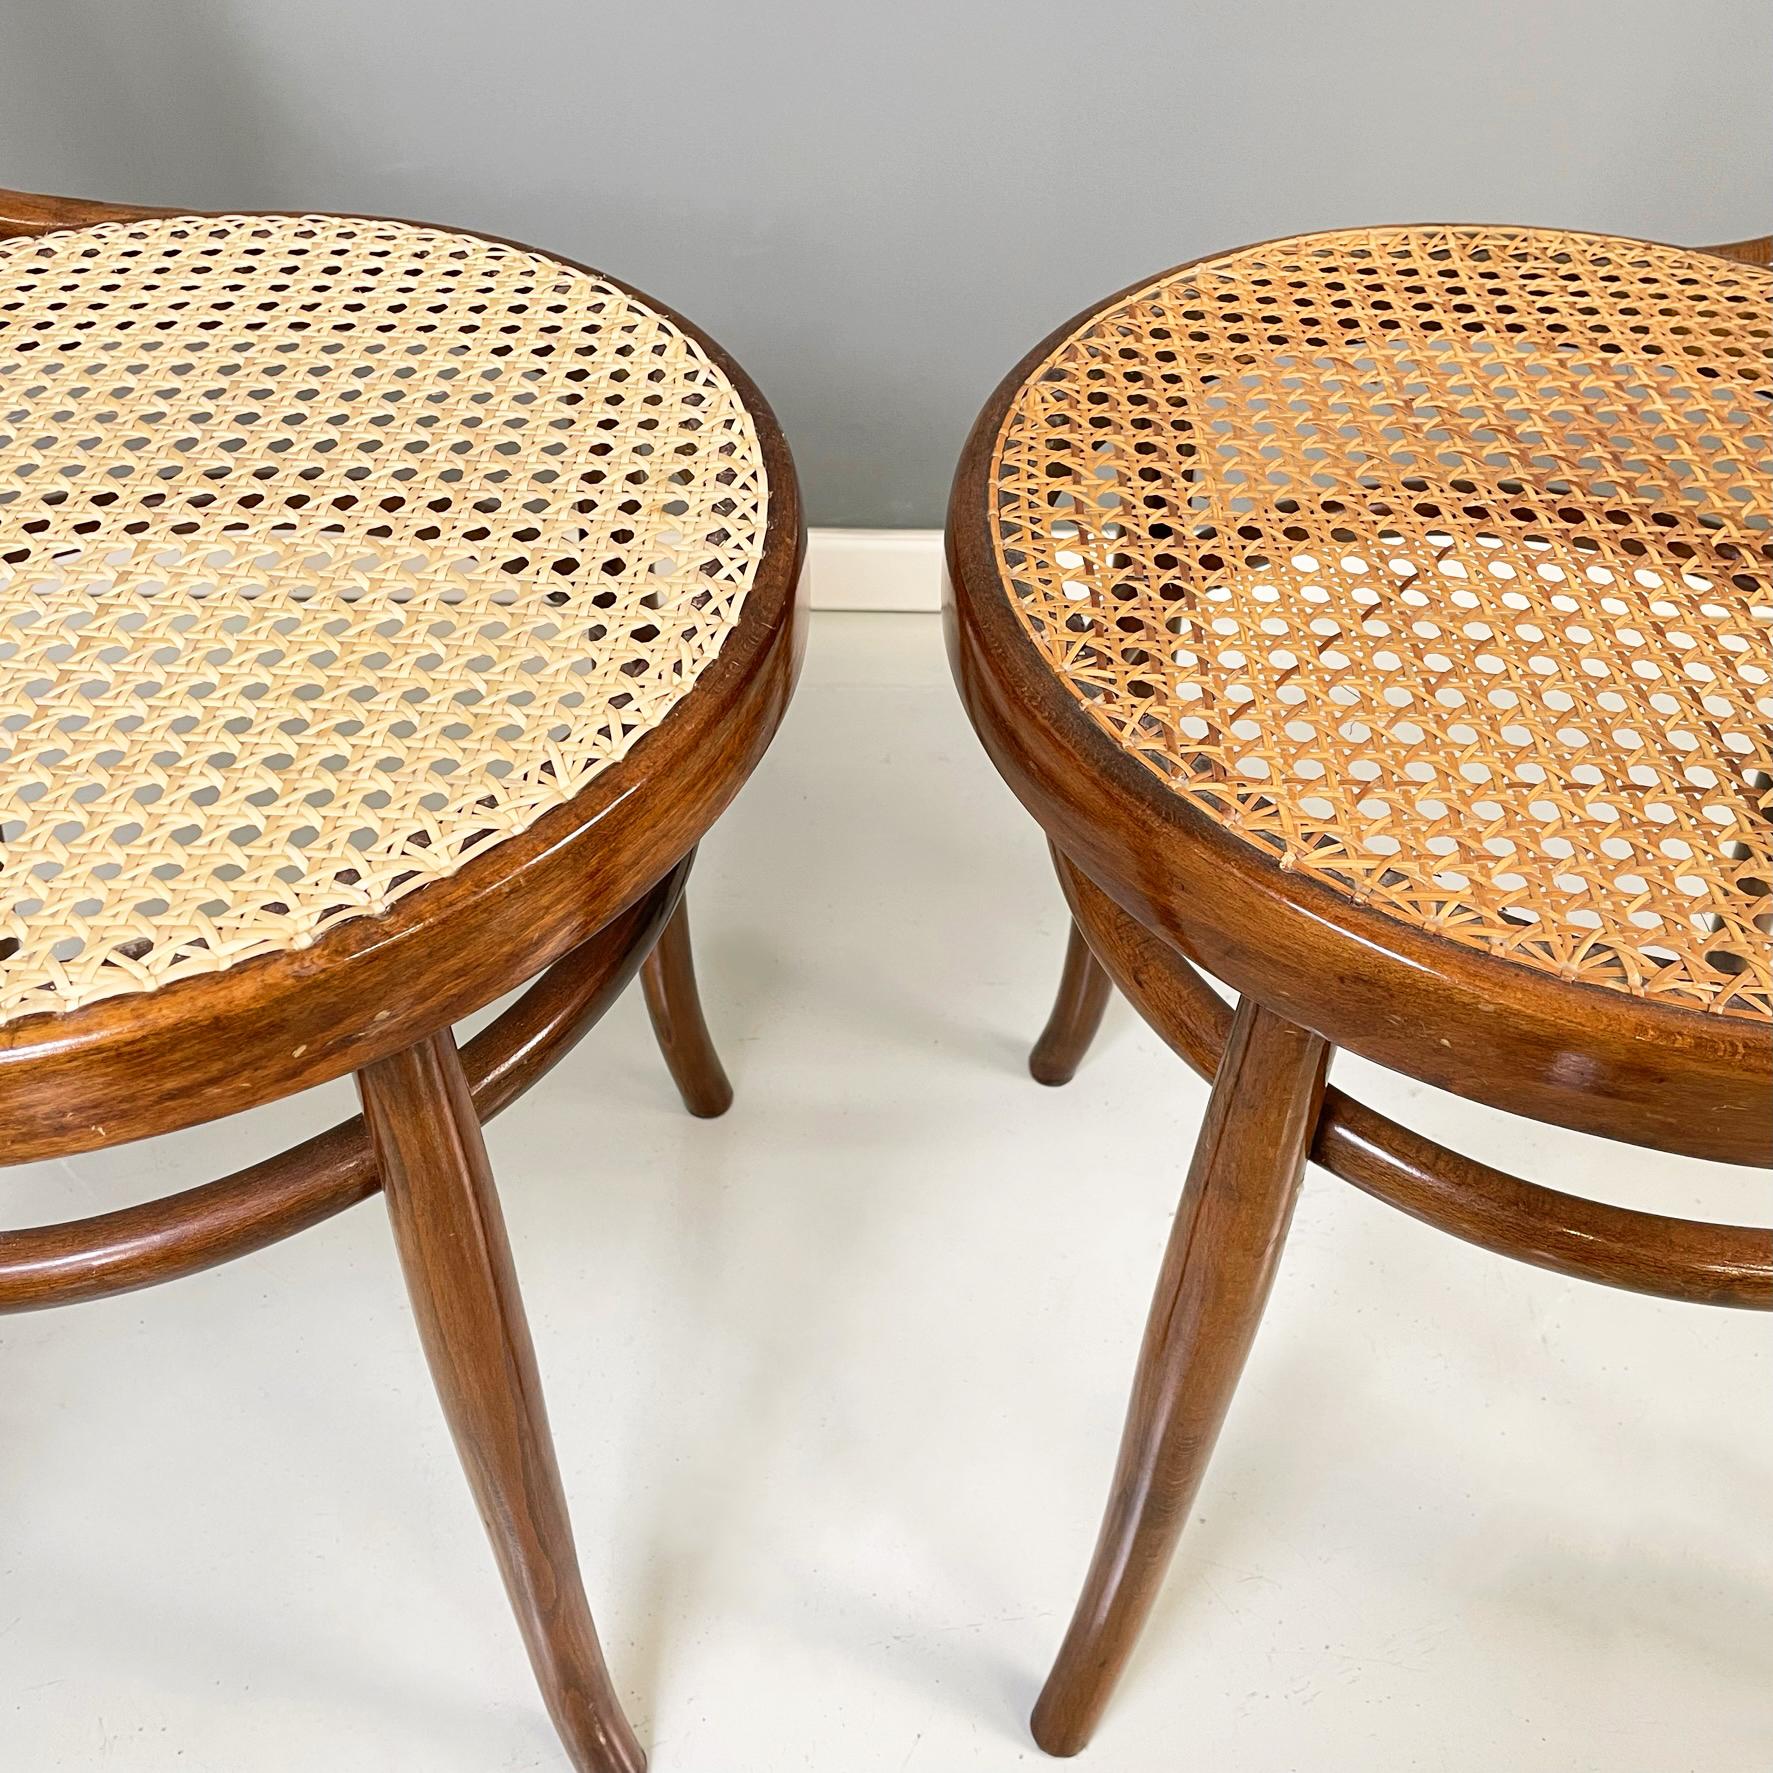 Austrian Chairs Thonet style with Straw and Wood by Salvatore Leone, 1900s For Sale 2